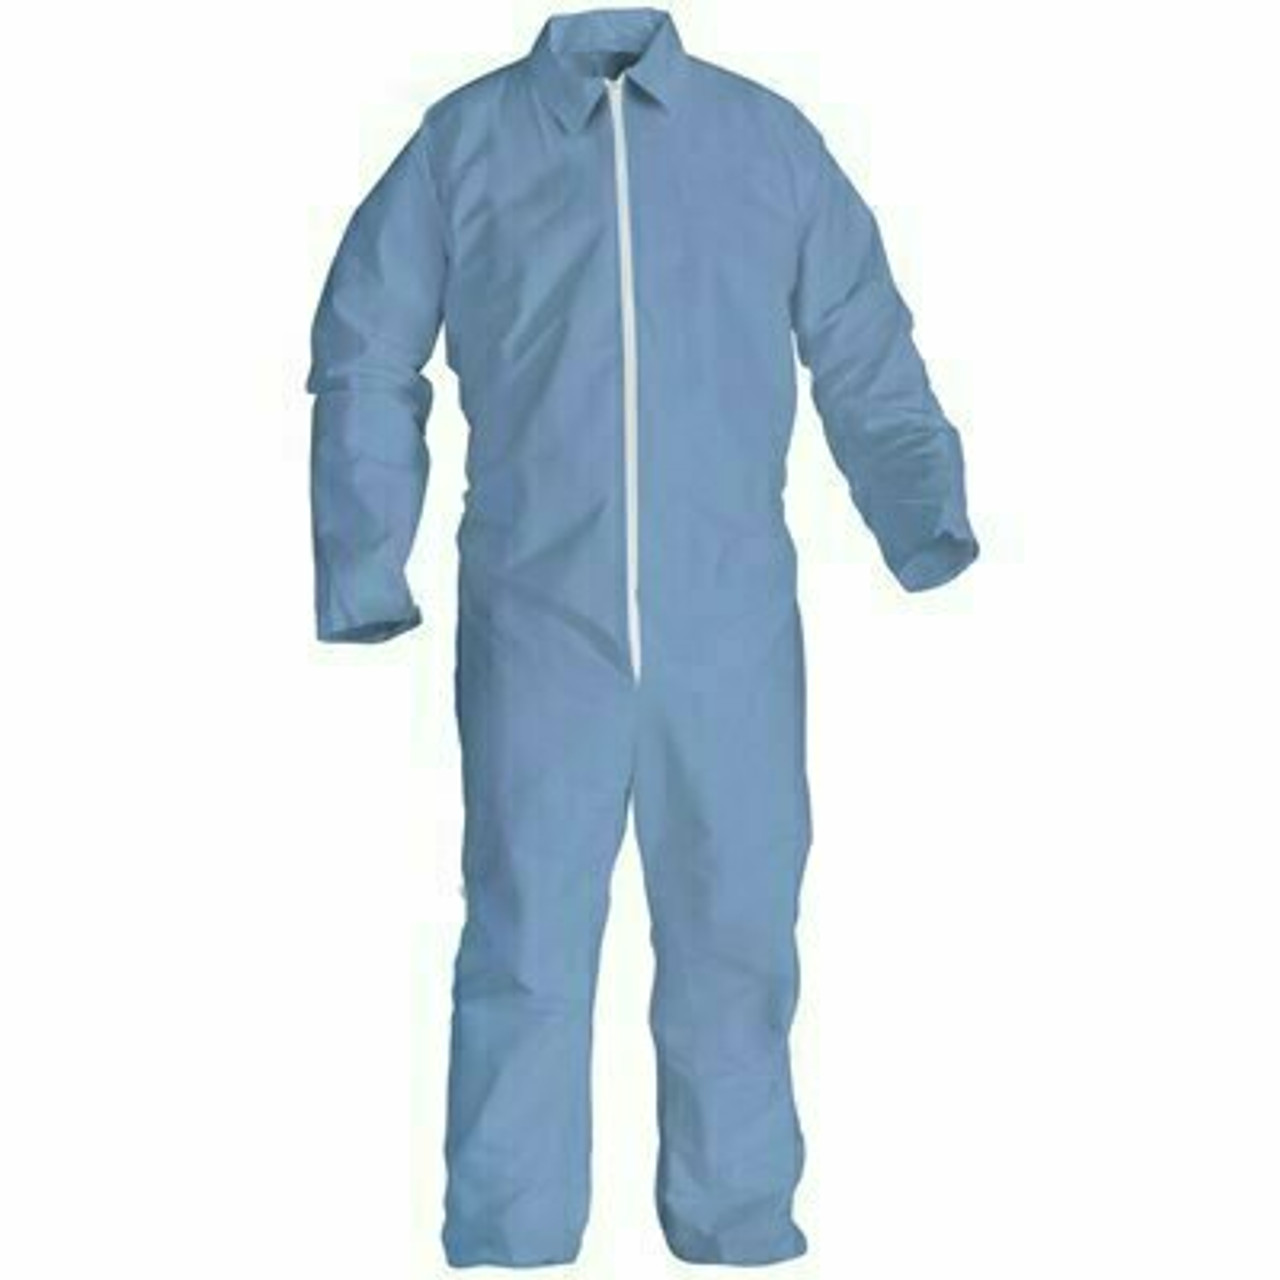 Kleenguard A65 Flame Resistant Coveralls, Front Zipper, Blue, Large